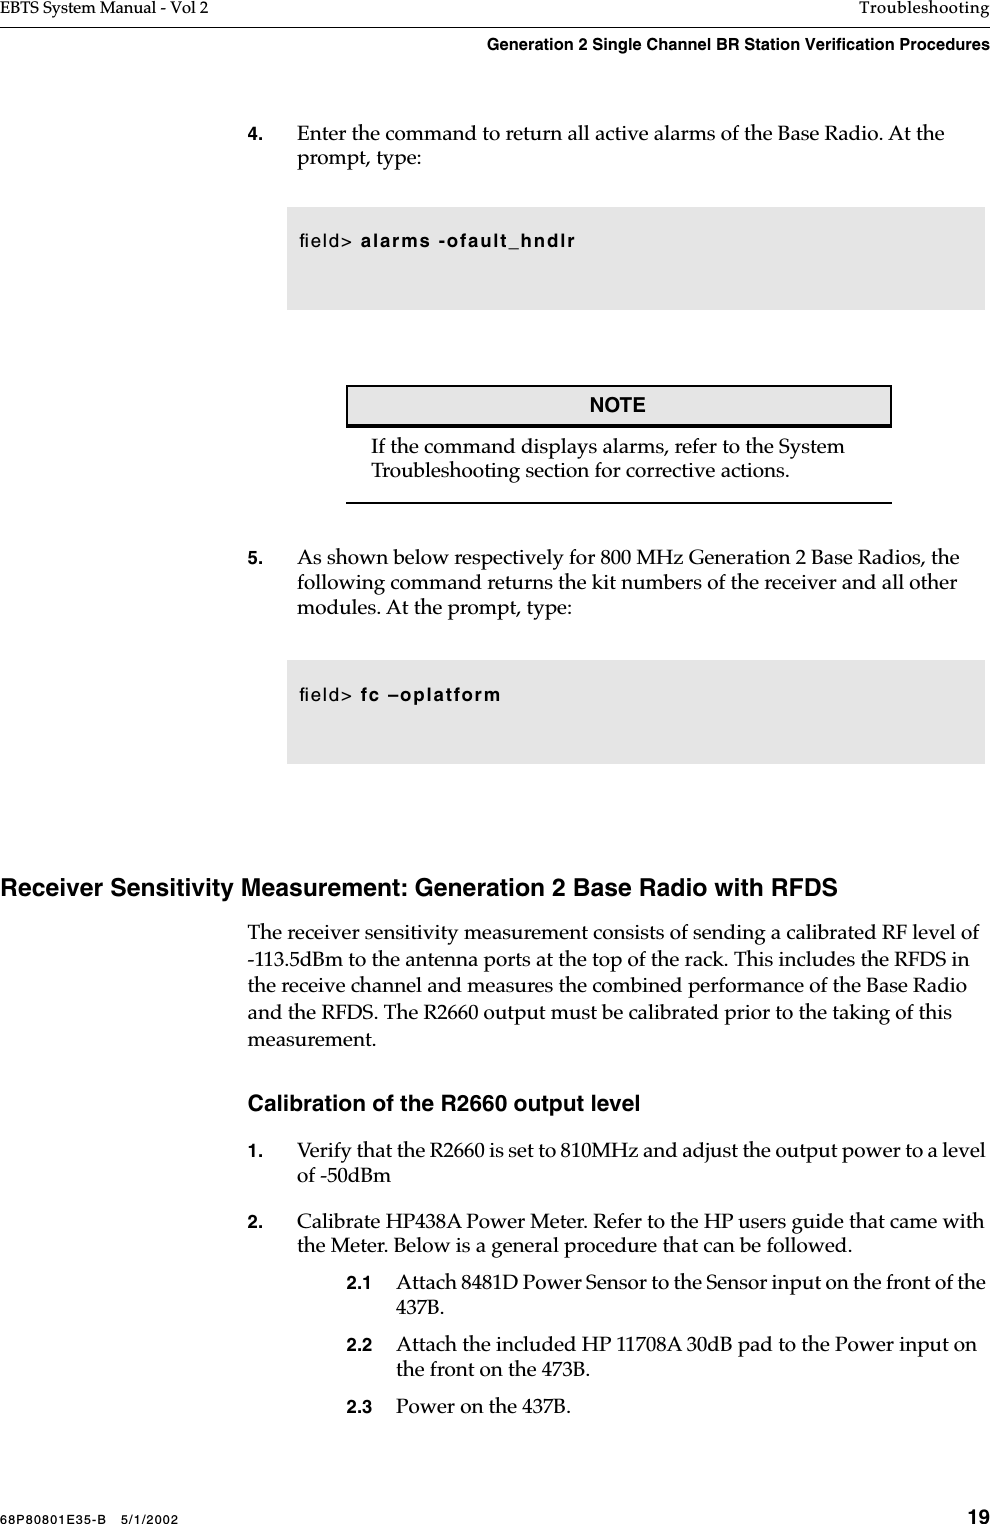 68P80801E35-B   5/1/2002 19EBTS System Manual - Vol 2 TroubleshootingGeneration 2 Single Channel BR Station Verification Procedures 4. Enter the command to return all active alarms of the Base Radio. At the prompt, type: NOTEIf the command displays alarms, refer to the System Troubleshooting section for corrective actions.5. As shown below respectively for 800 MHz Generation 2 Base Radios, the following command returns the kit numbers of the receiver and all other modules. At the prompt, type: Receiver Sensitivity Measurement: Generation 2 Base Radio with RFDSThe receiver sensitivity measurement consists of sending a calibrated RF level of -113.5dBm to the antenna ports at the top of the rack. This includes the RFDS in the receive channel and measures the combined performance of the Base Radio and the RFDS. The R2660 output must be calibrated prior to the taking of this measurement.Calibration of the R2660 output level1. Verify that the R2660 is set to 810MHz and adjust the output power to a level of -50dBm2. Calibrate HP438A Power Meter. Refer to the HP users guide that came with the Meter. Below is a general procedure that can be followed.2.1 Attach 8481D Power Sensor to the Sensor input on the front of the 437B. 2.2 Attach the included HP 11708A 30dB pad to the Power input on the front on the 473B.2.3 Power on the 437B.ﬁeld&gt; alarms -ofault_hndlrﬁeld&gt; fc –oplatform